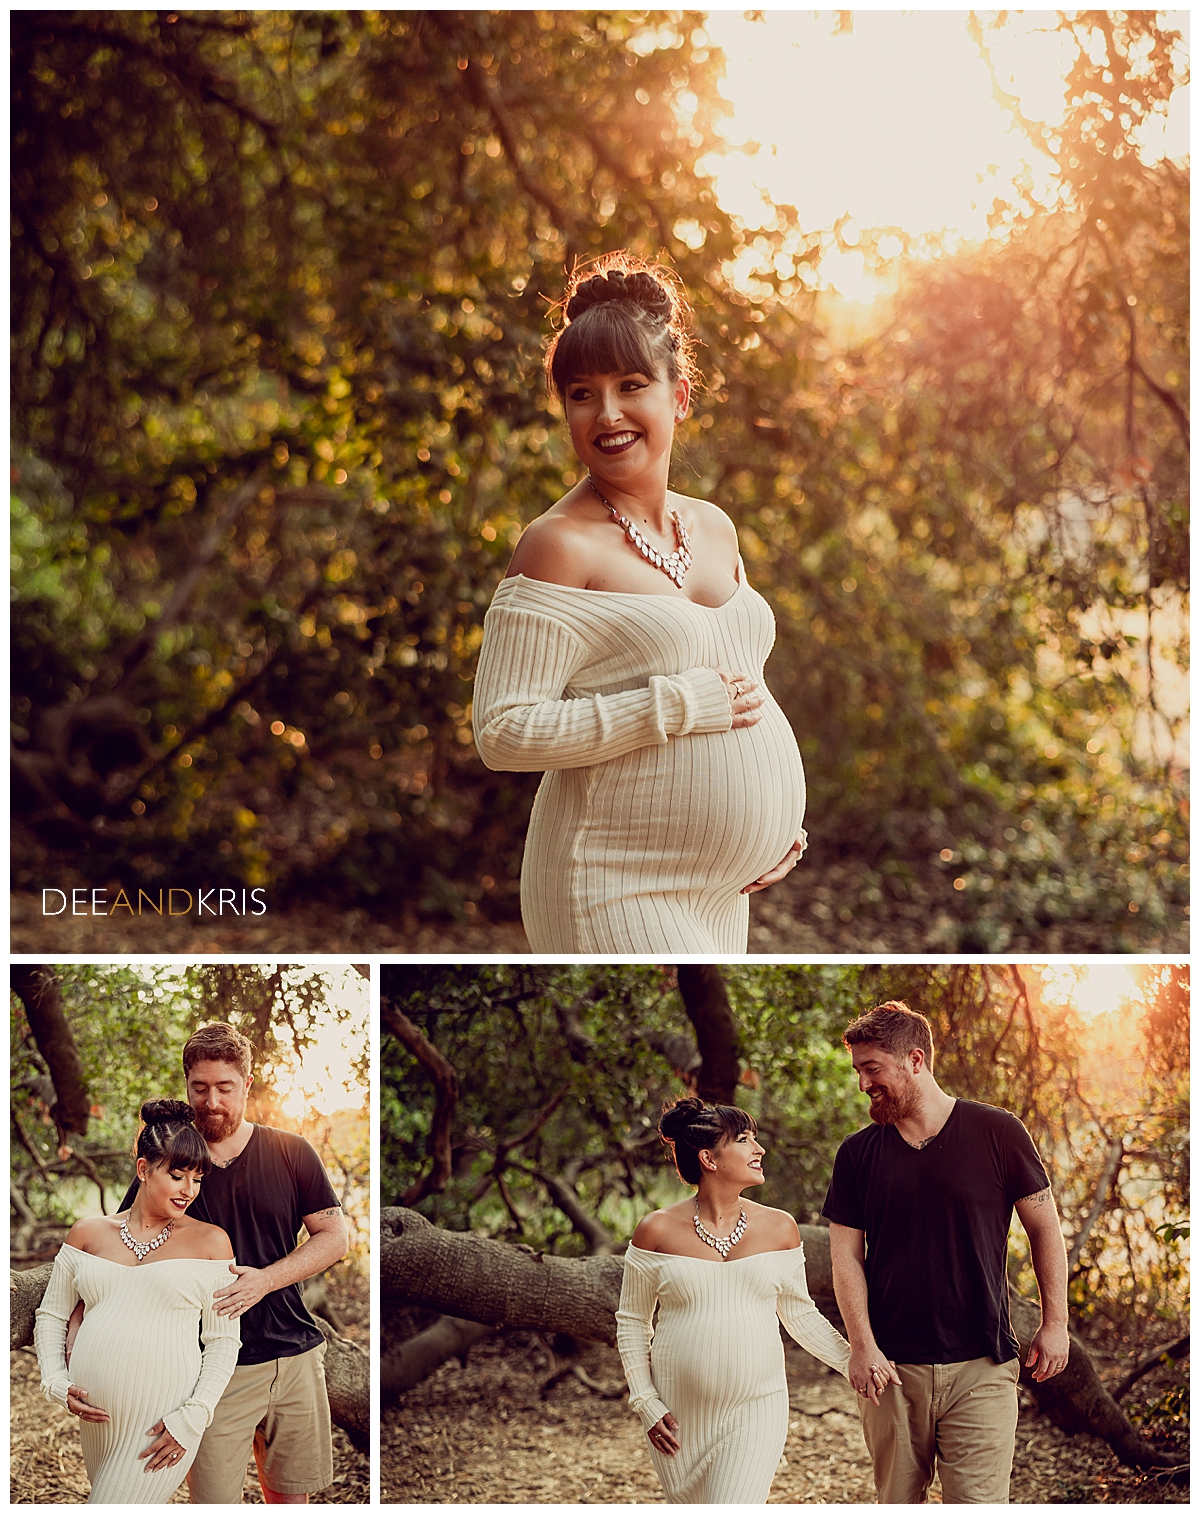 Three images of couple; Margaret wearing a cream off-the-shoulder sweater dress as she cradles her belly with her hands. Top image is of Margaret smiling with the sun shining on her. In the bottom left image, Ryan holds Margaret from behind as she leans her head against him. The bottom right image is of Margaret and Ryan holding hands and walking forward with the sun setting behind them.